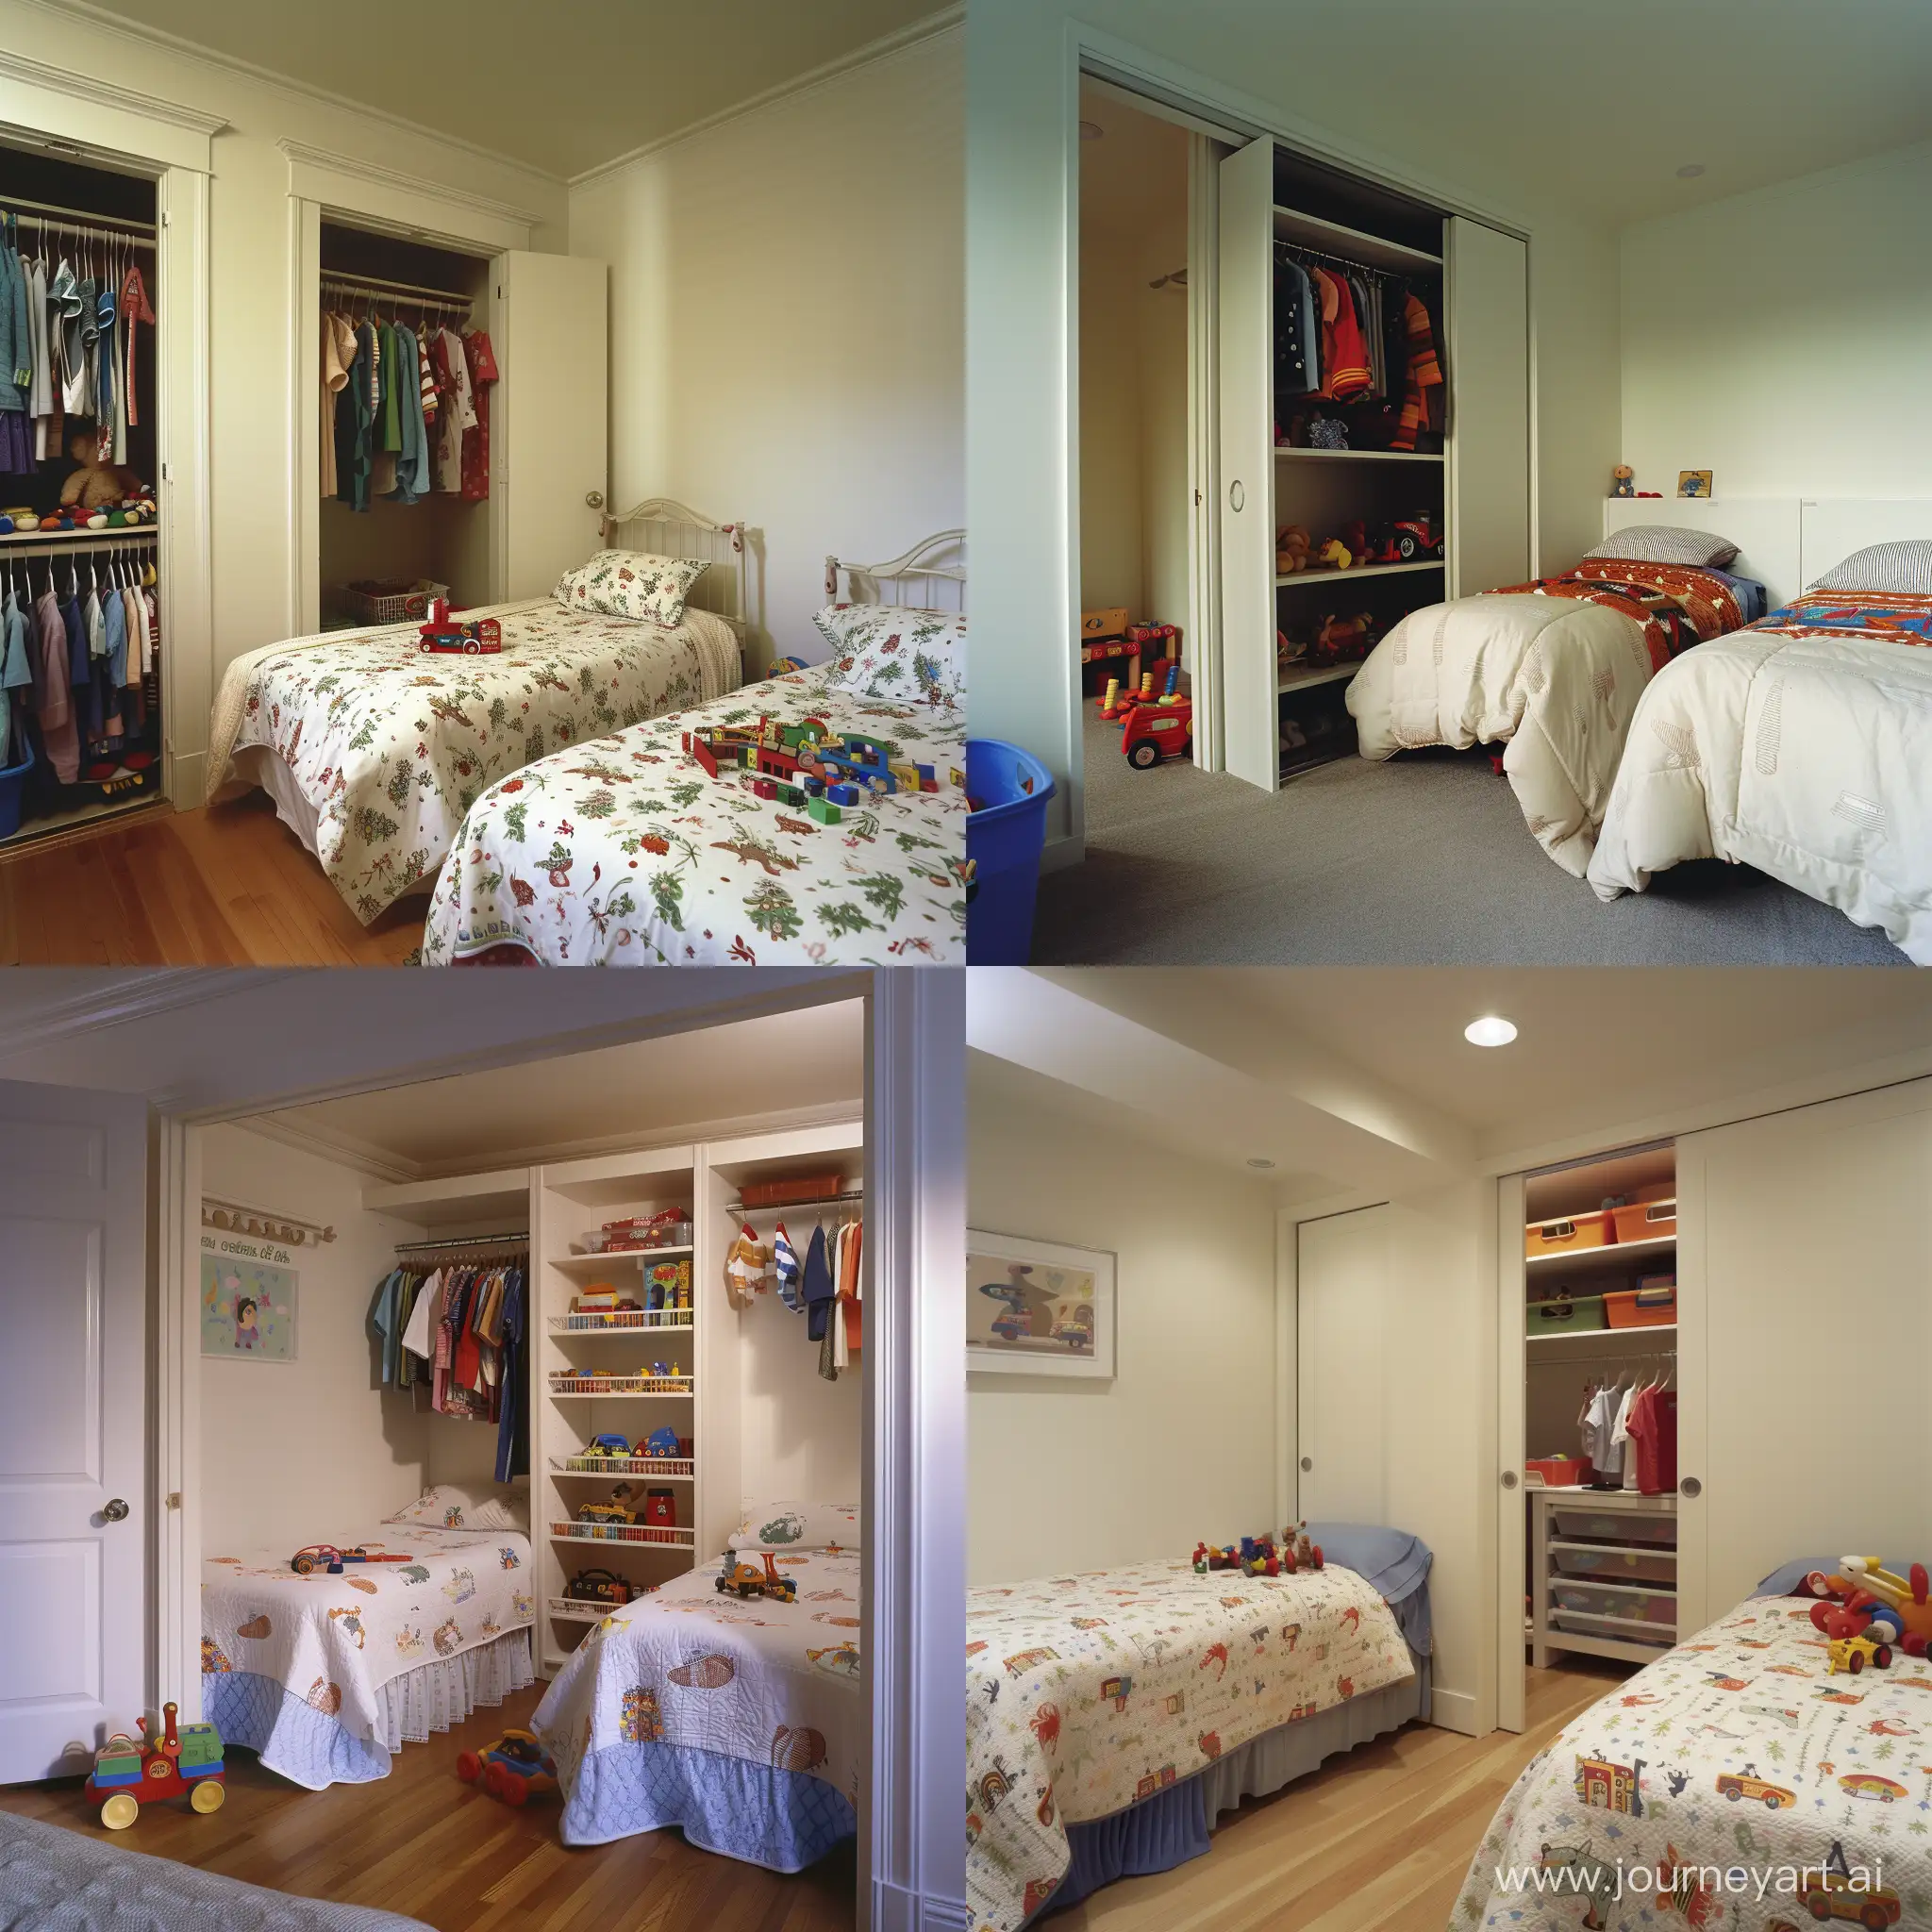 An interior shot of a children's bedroom containing two beds, a closet, and some toys